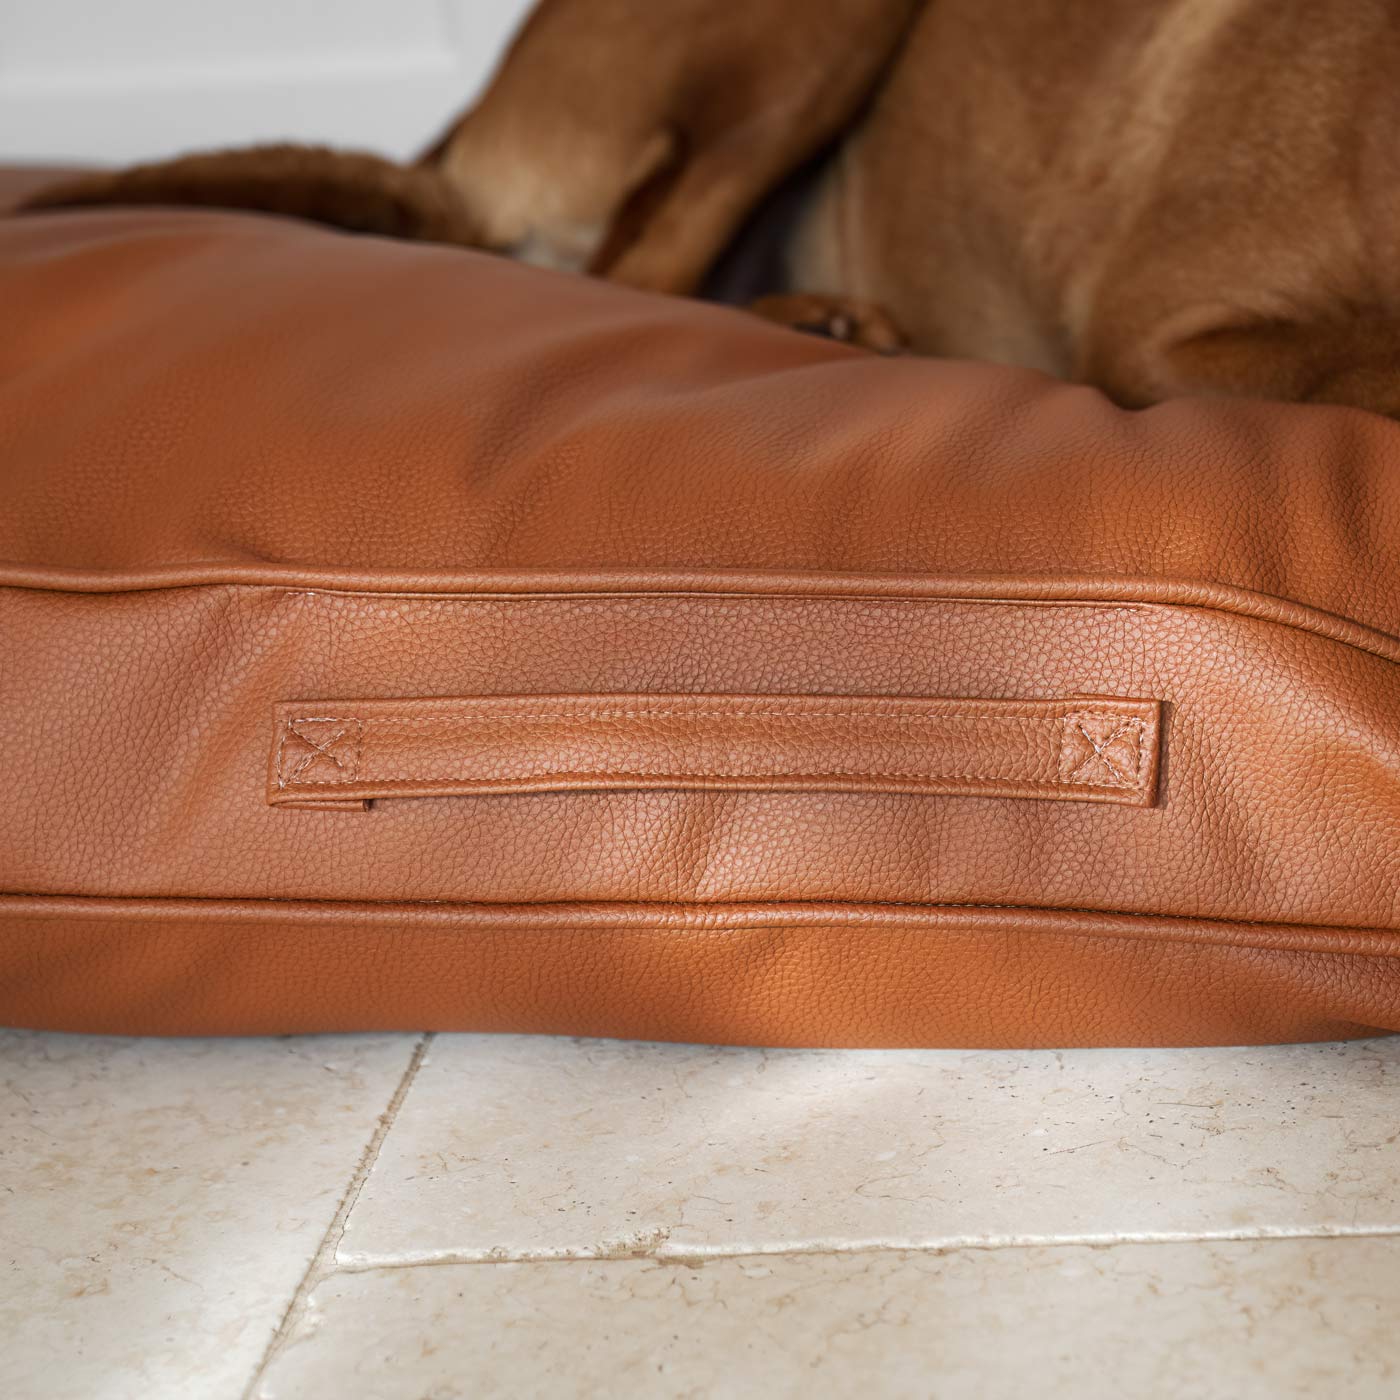 Luxury Dog Cushion in Rhino Tough Desert Faux Leather in Ember. The Perfect Pet Bed Time Accessory! Available Now at Lords & Labradors US